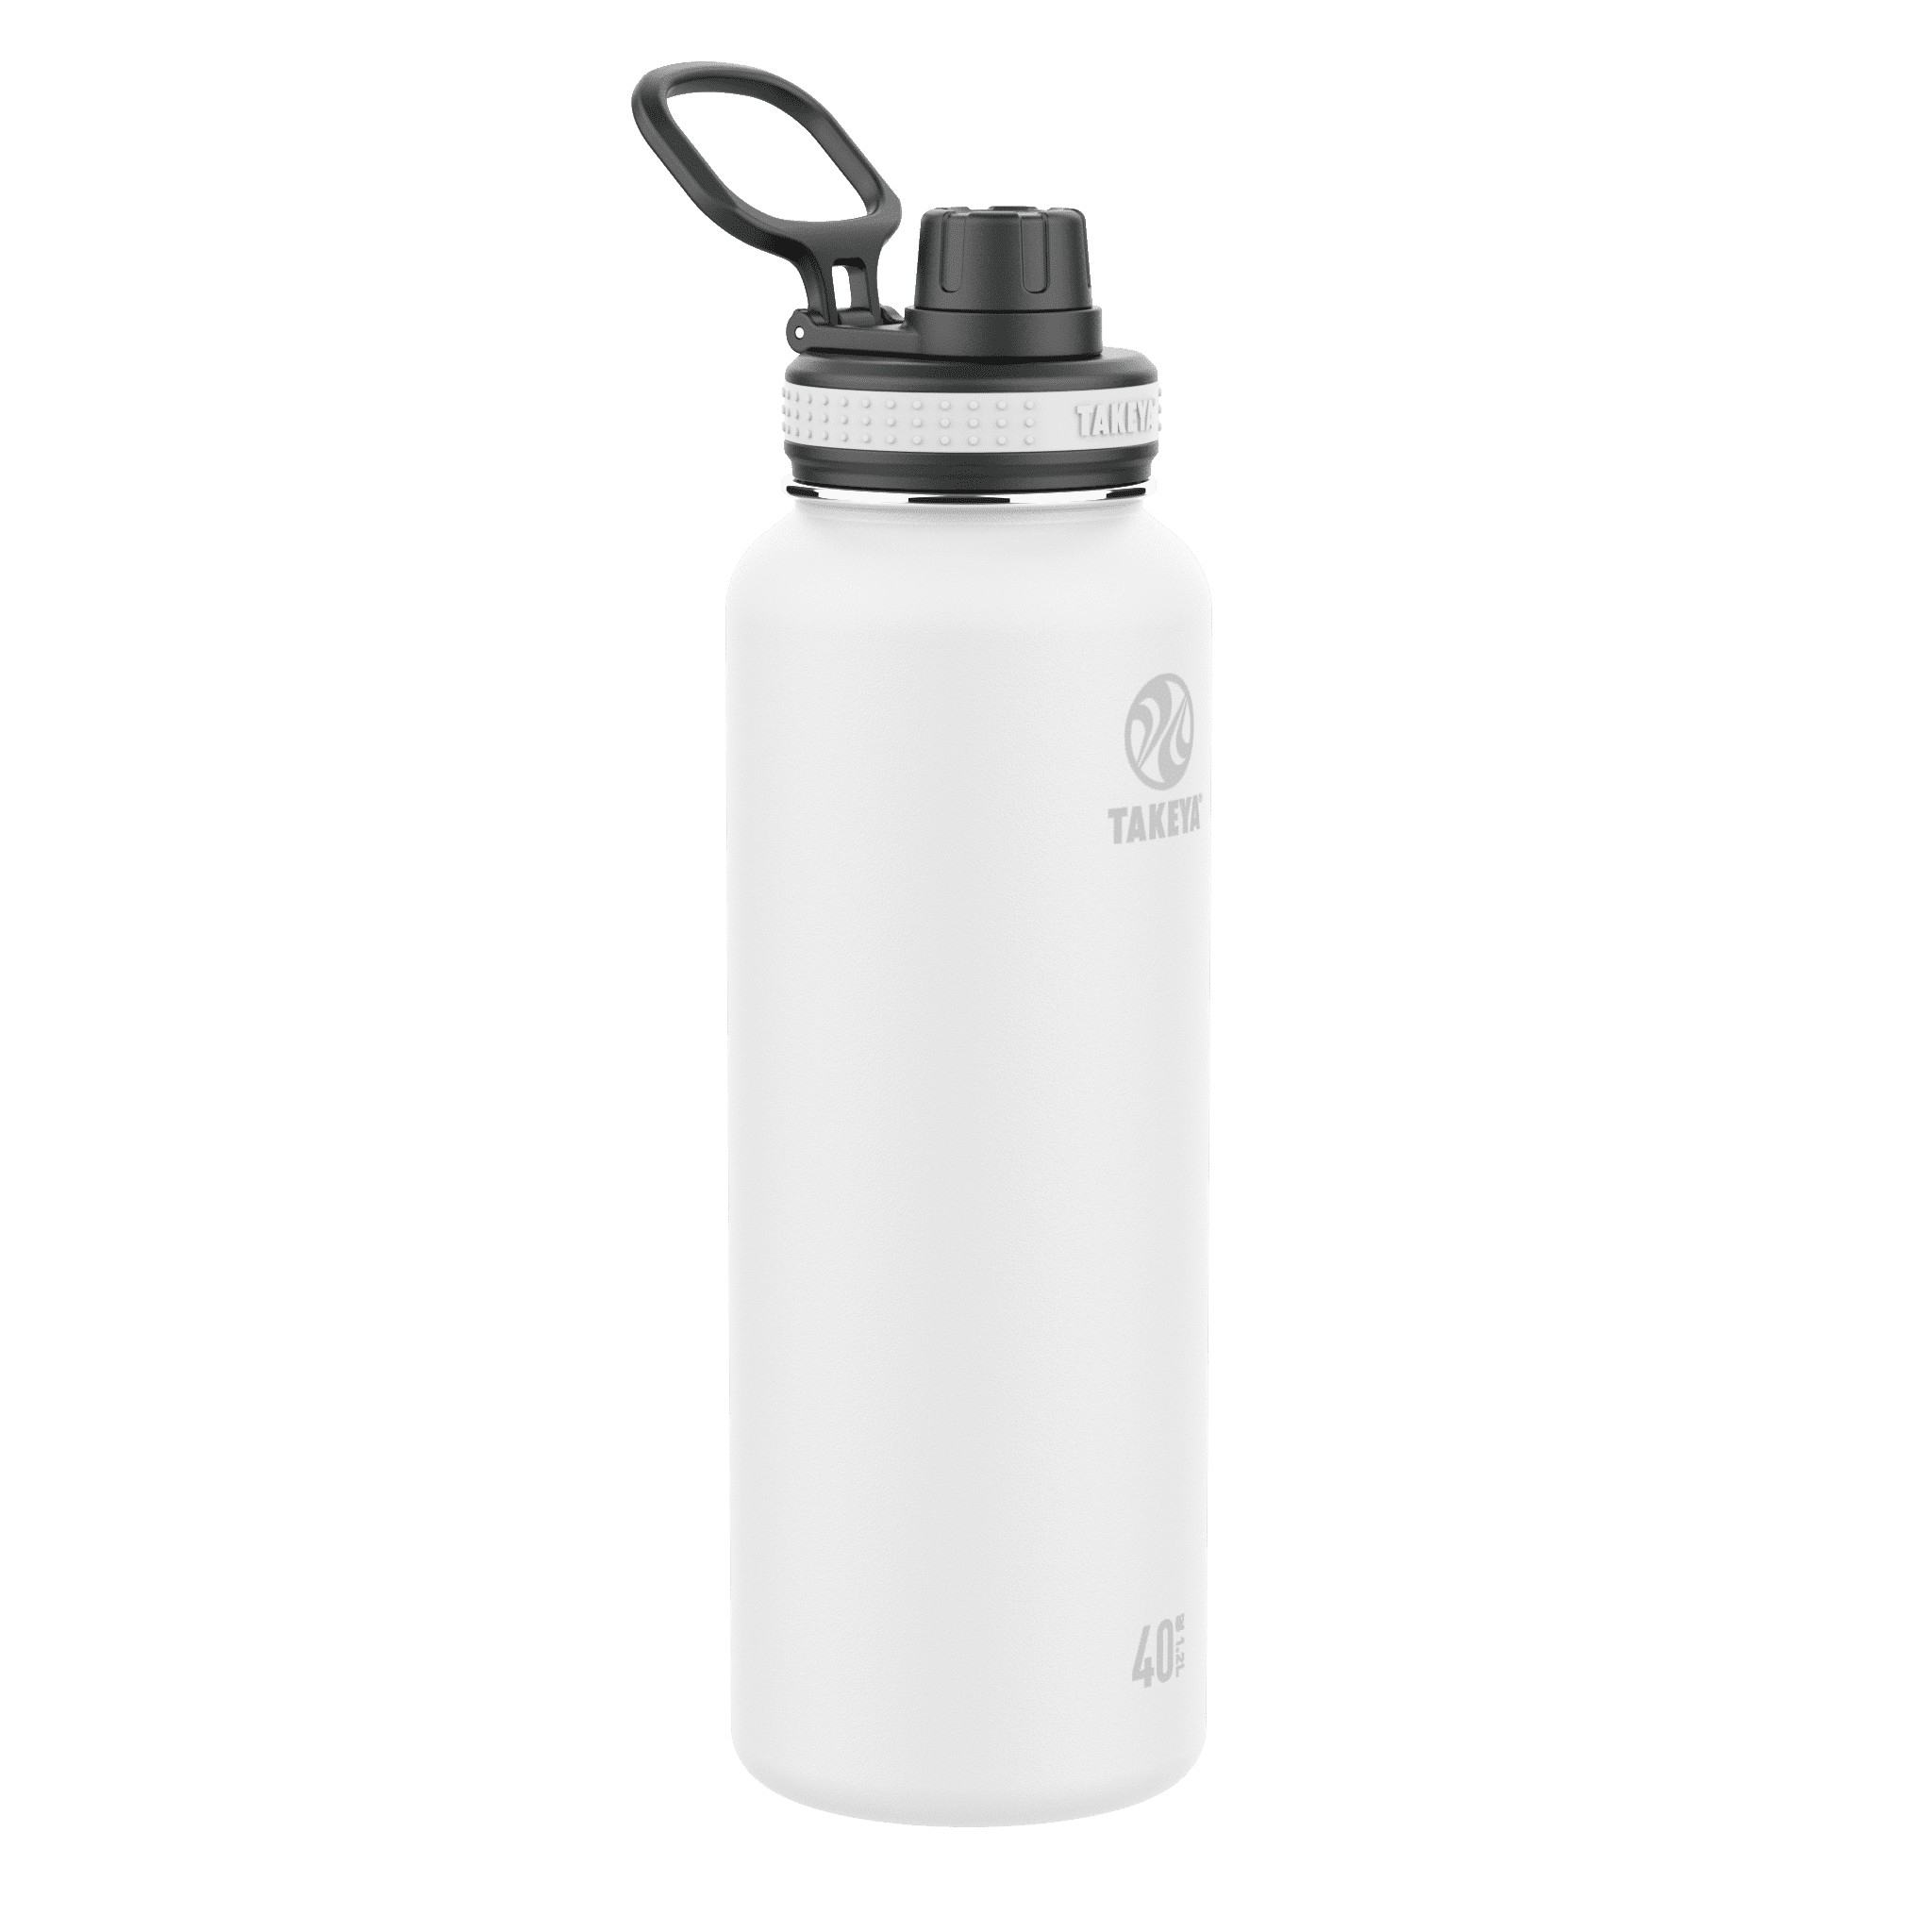 Takeya 40oz Originals Insulated Stainless Steel Water Bottle With Spout Lid  - White : Target